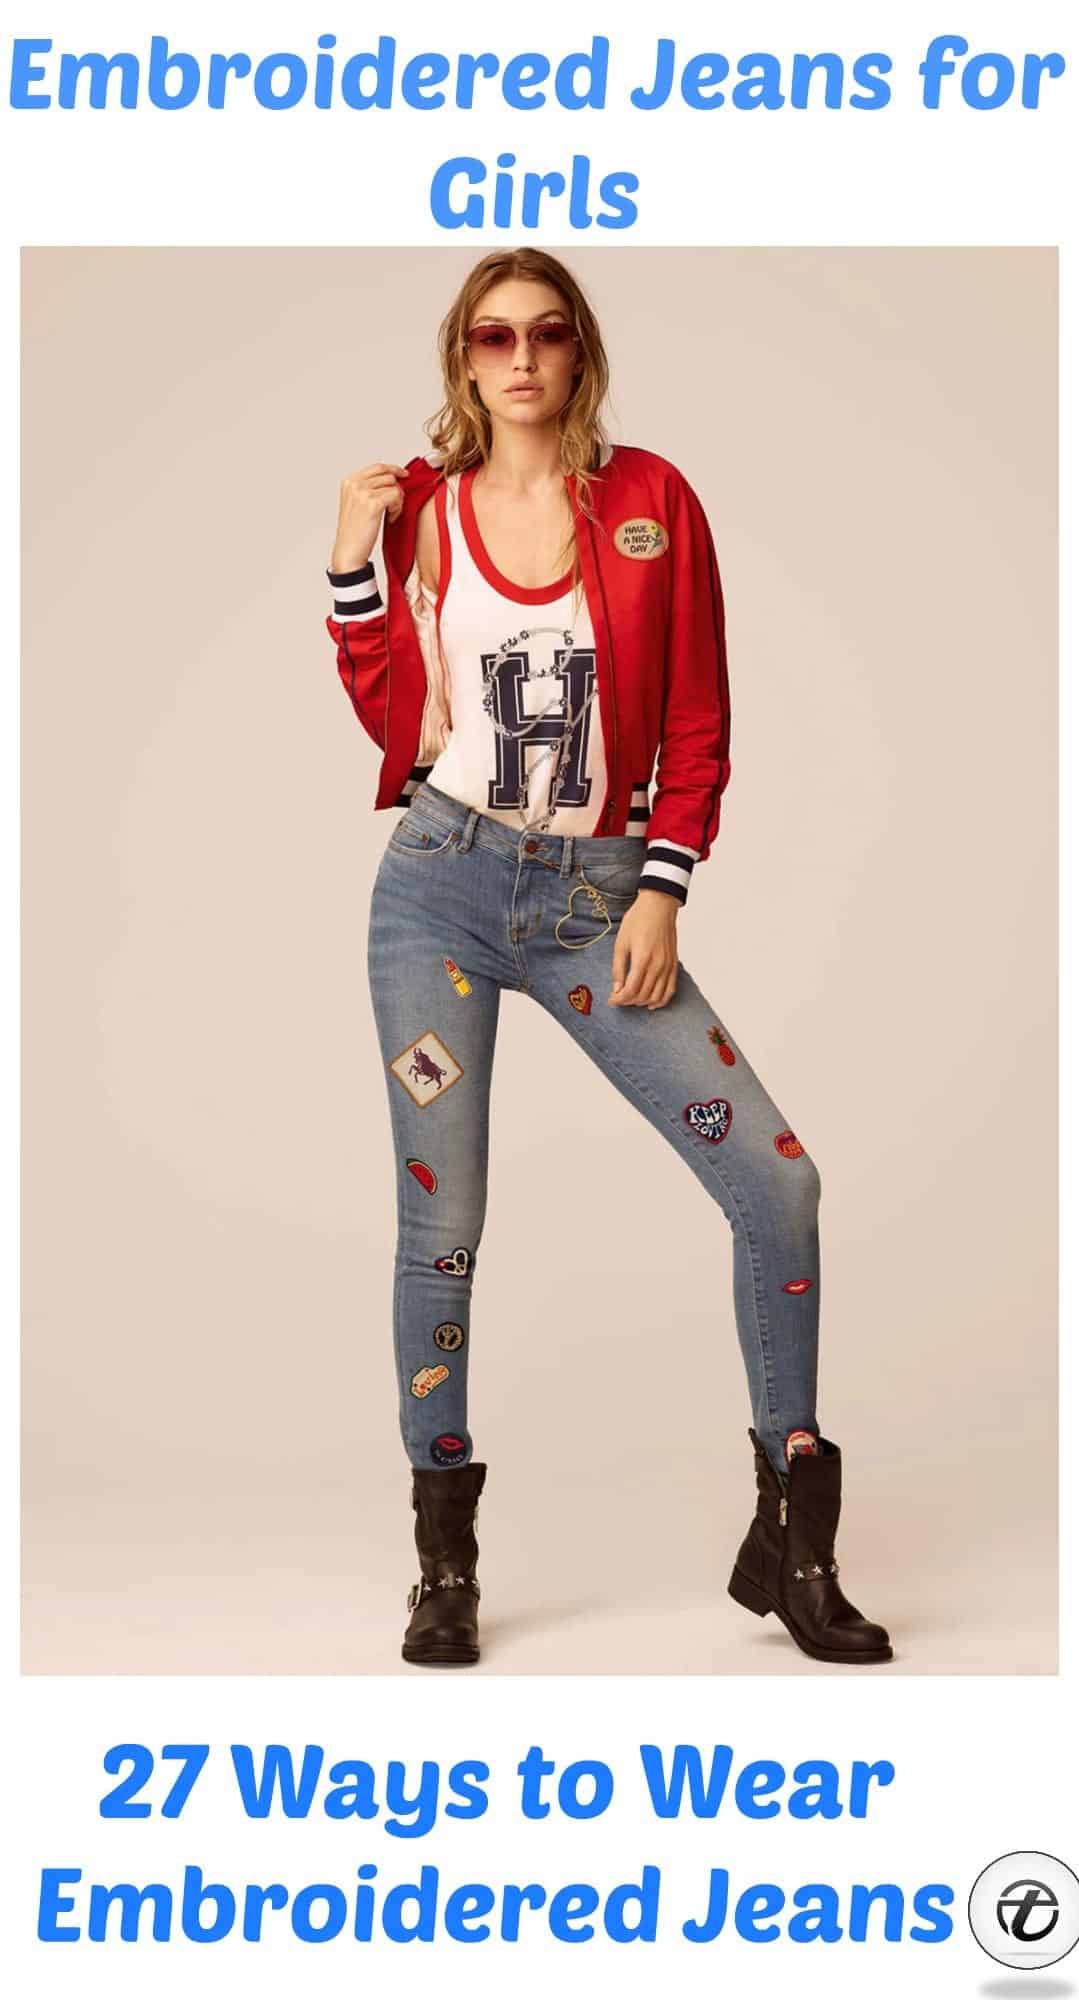 Embroidered Jeans for Girls (1)